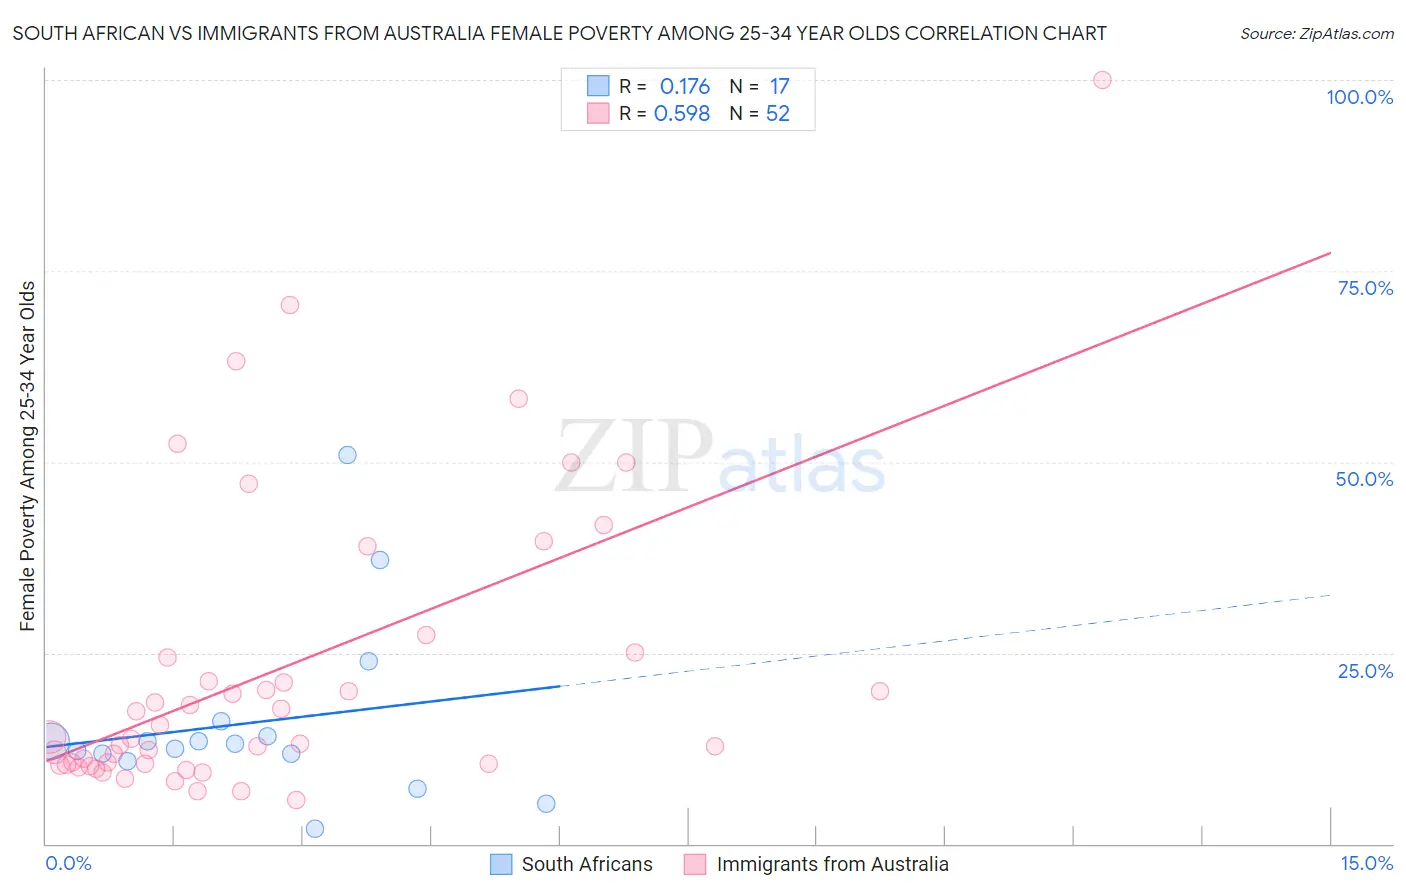 South African vs Immigrants from Australia Female Poverty Among 25-34 Year Olds